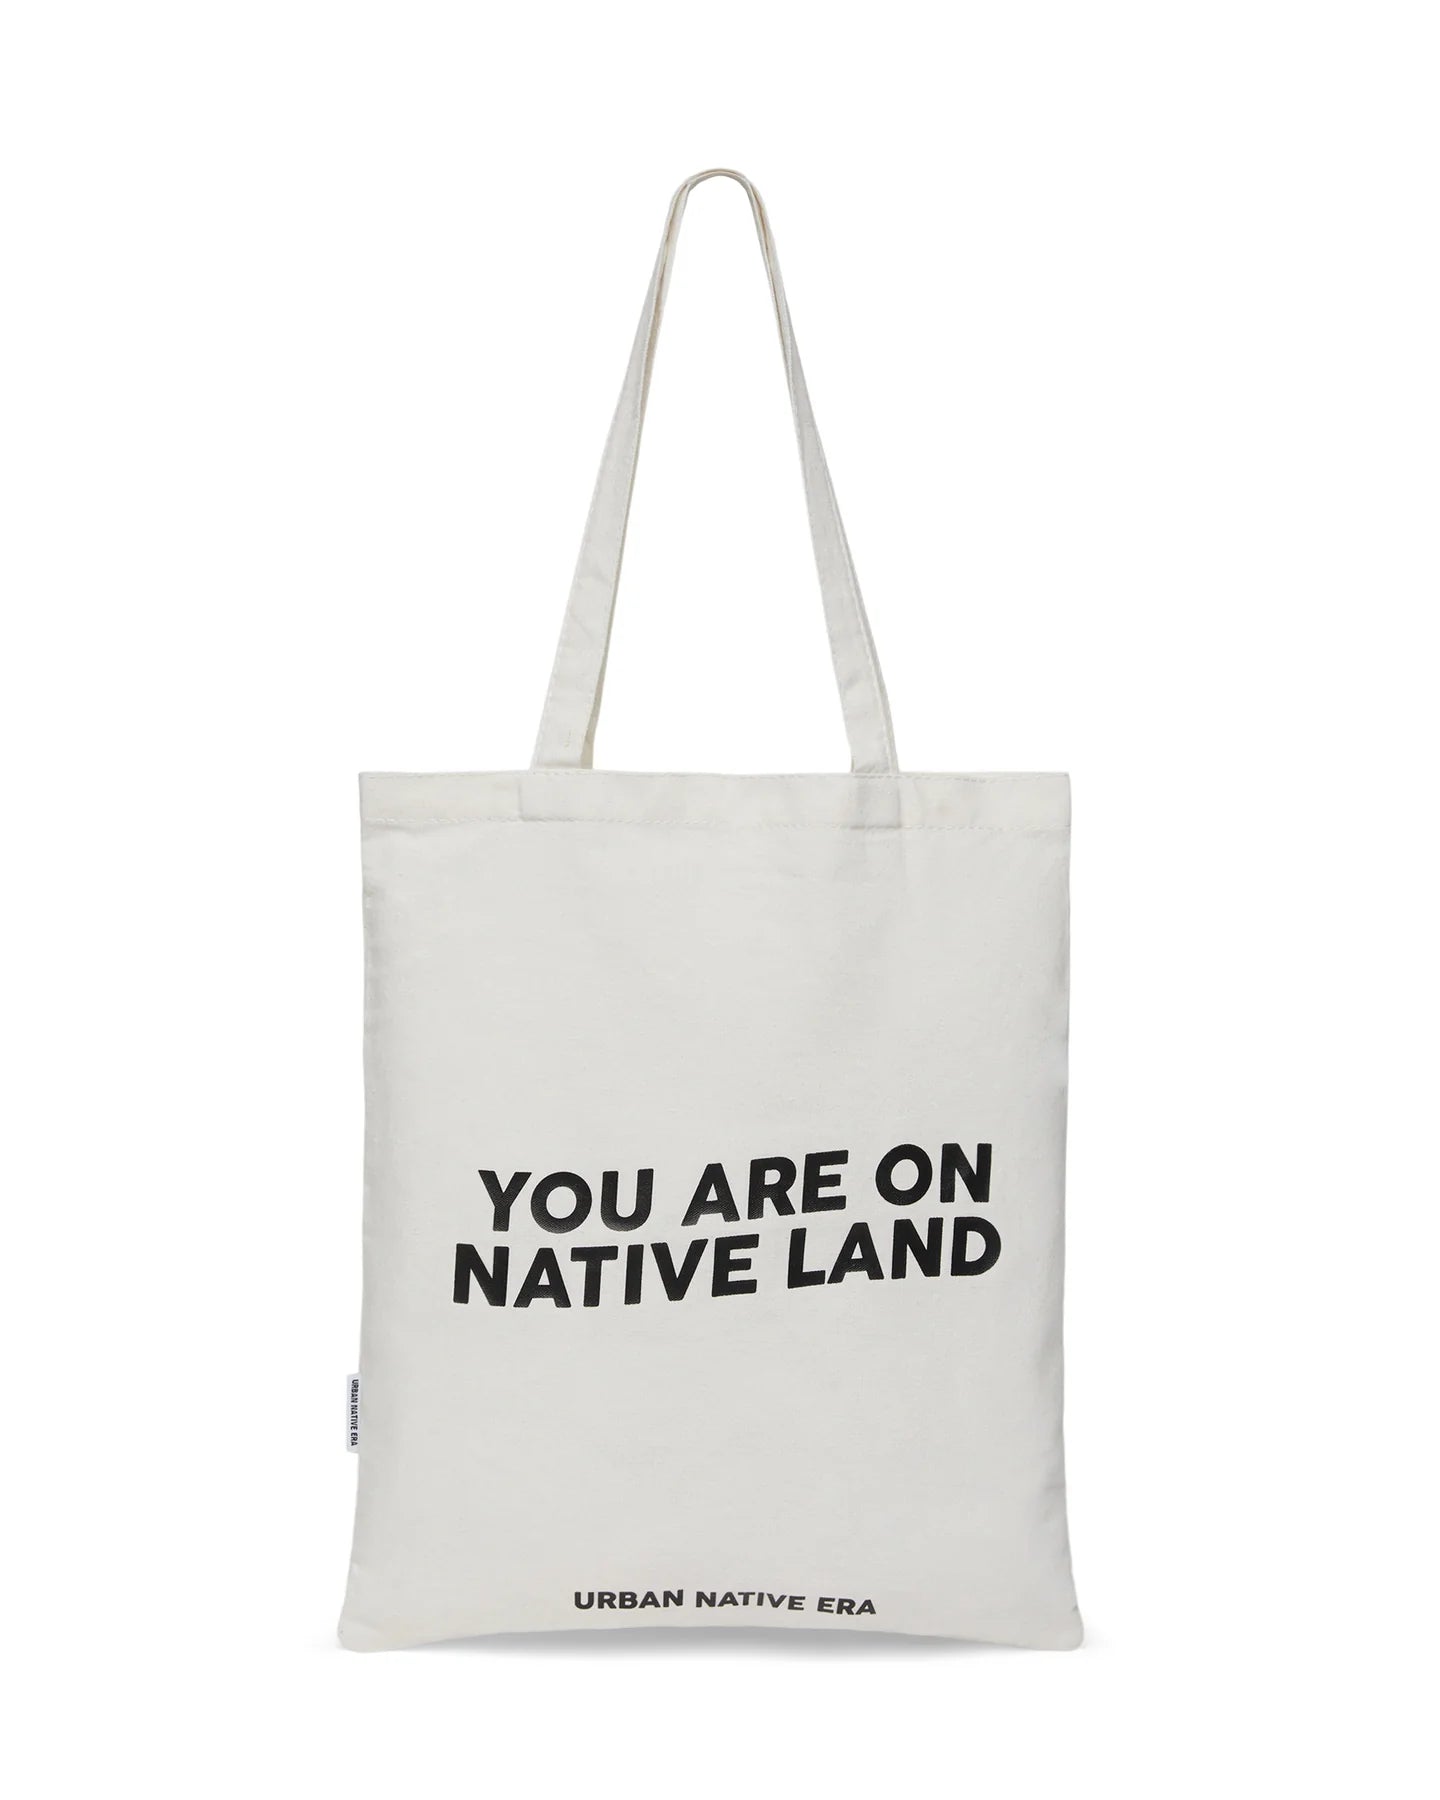 'YOU ARE ON NATIVE LAND' Recycled Tote